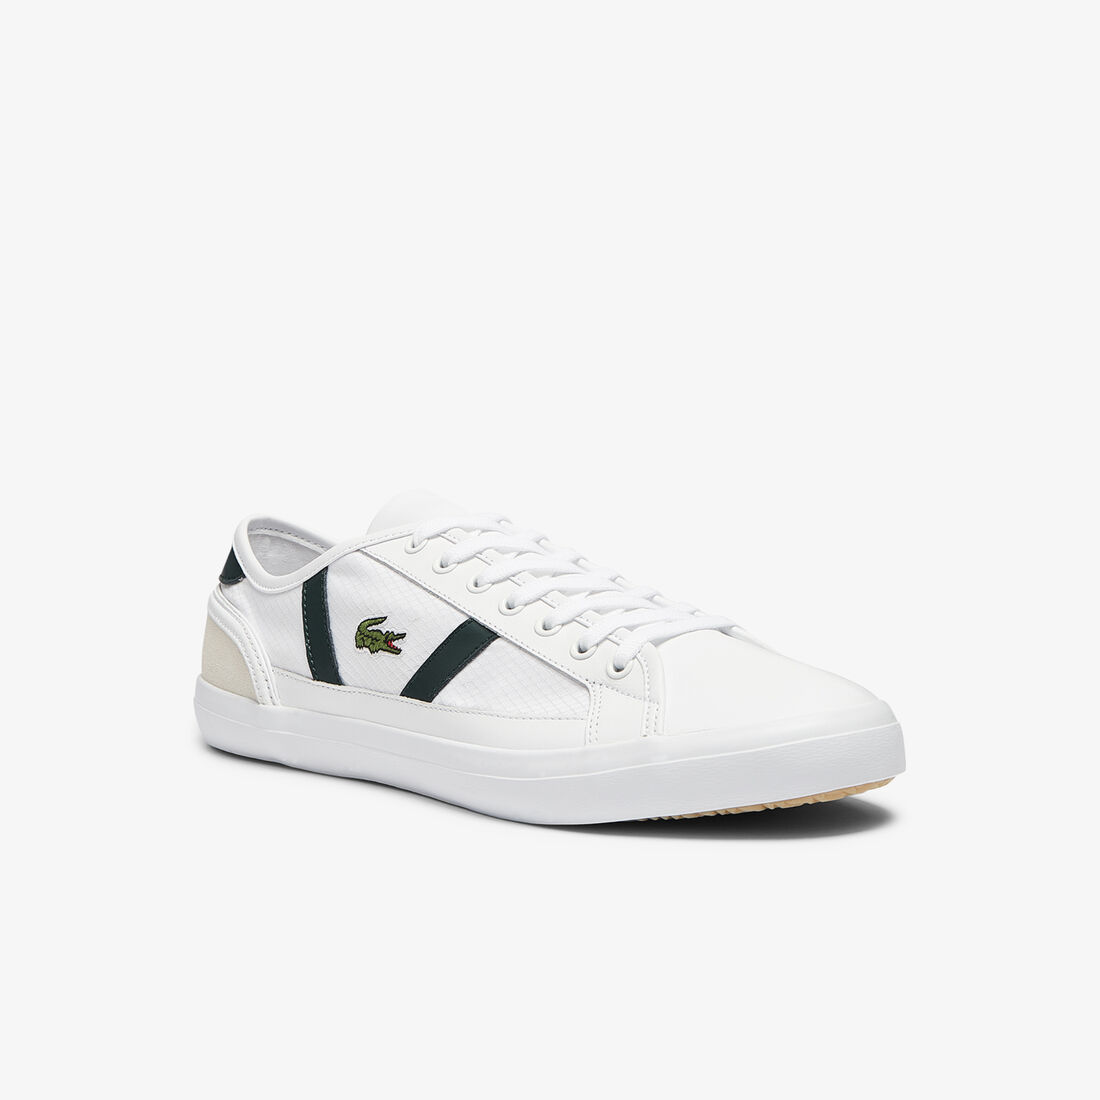 Men's Sideline Textile and Leather Trainers